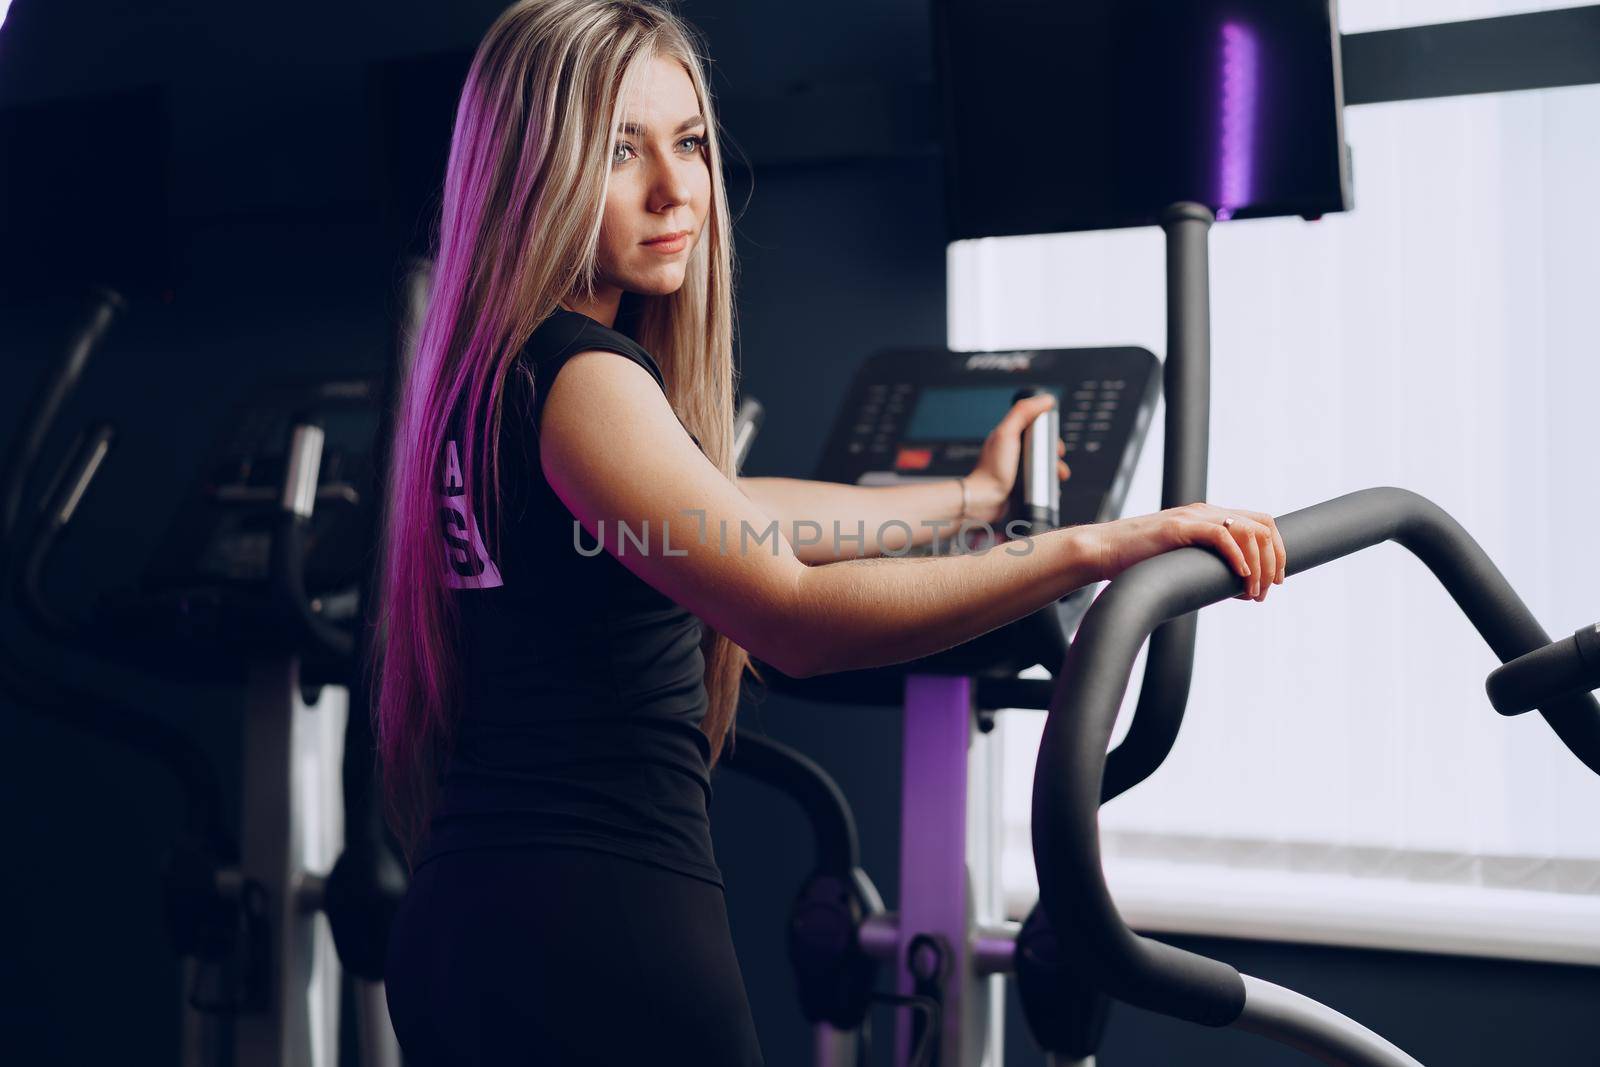 Attractive young blonde woman exercising on cardio training apparatus in dark gym